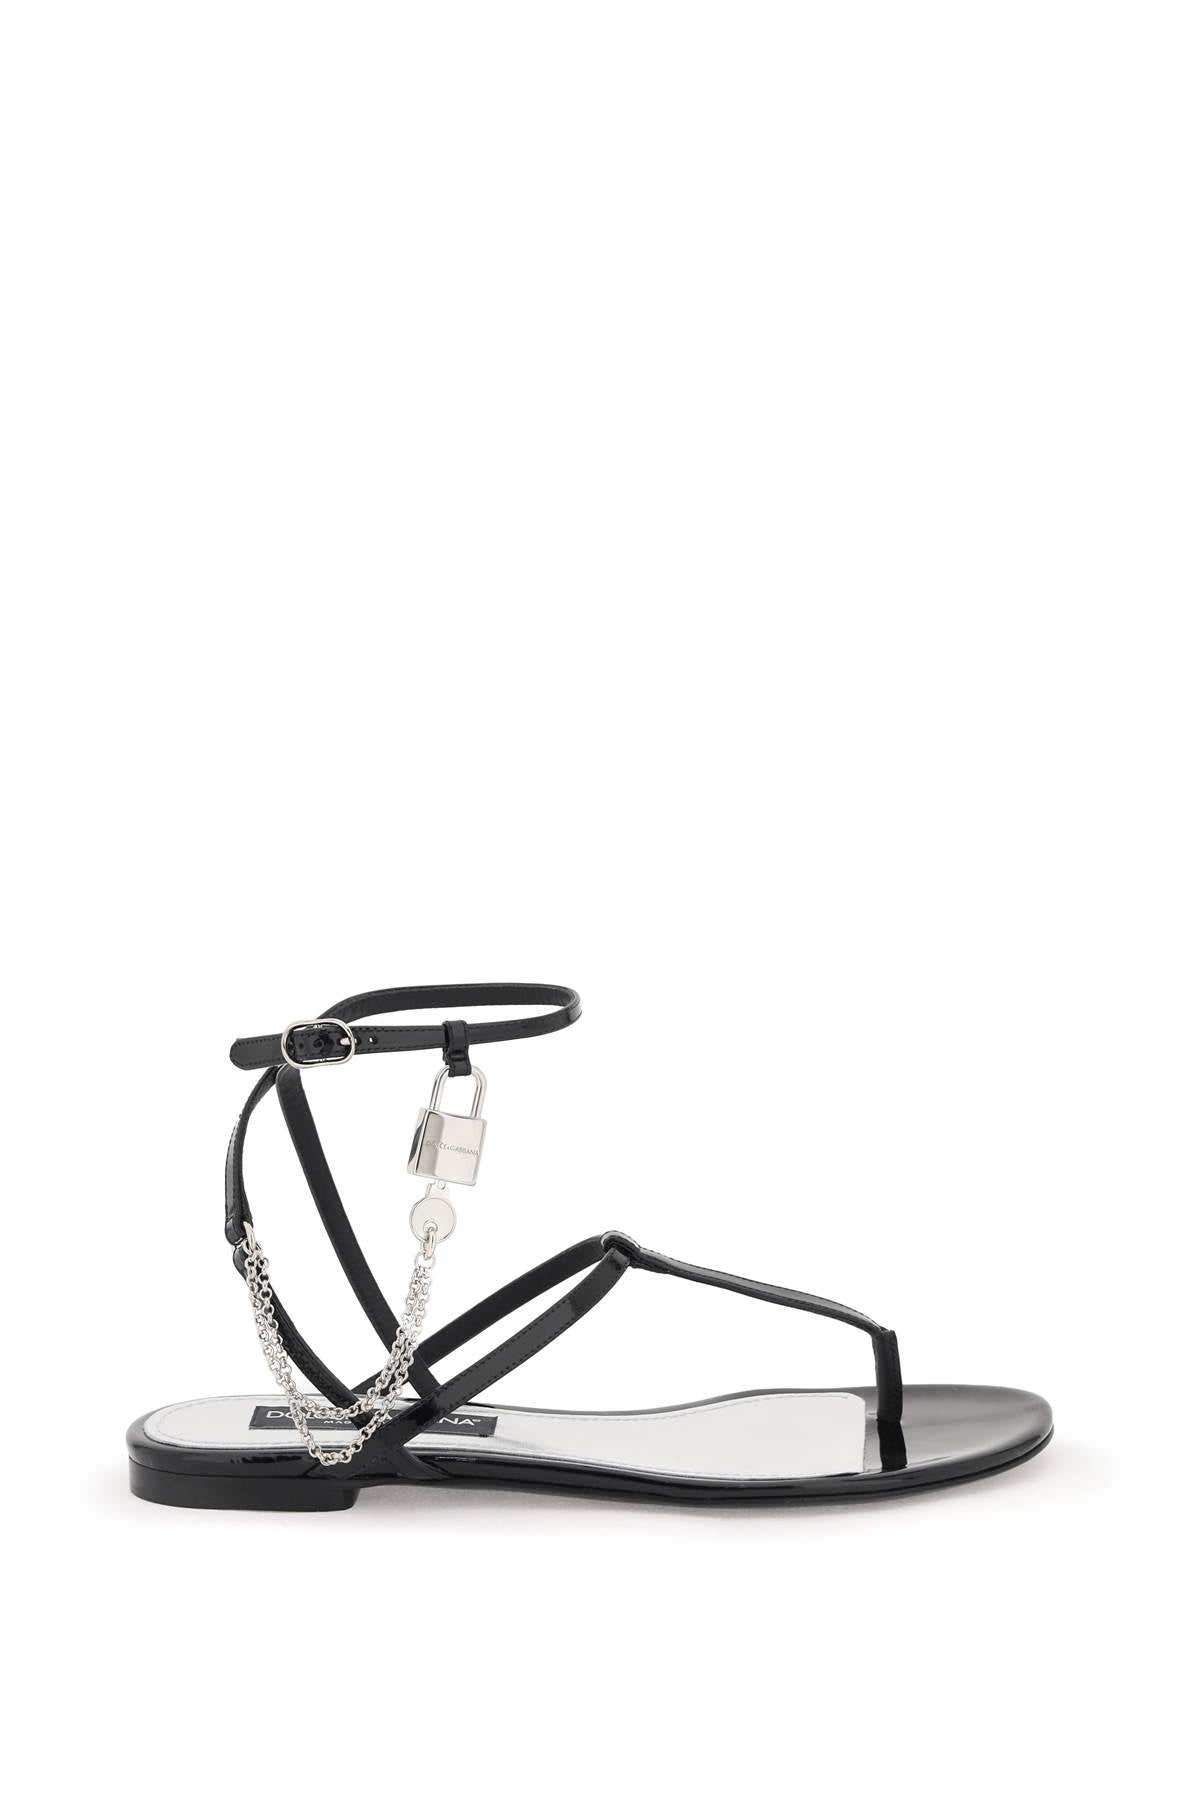 DOLCE & GABBANA Black Patent Leather Thong Sandal with Chain for Women